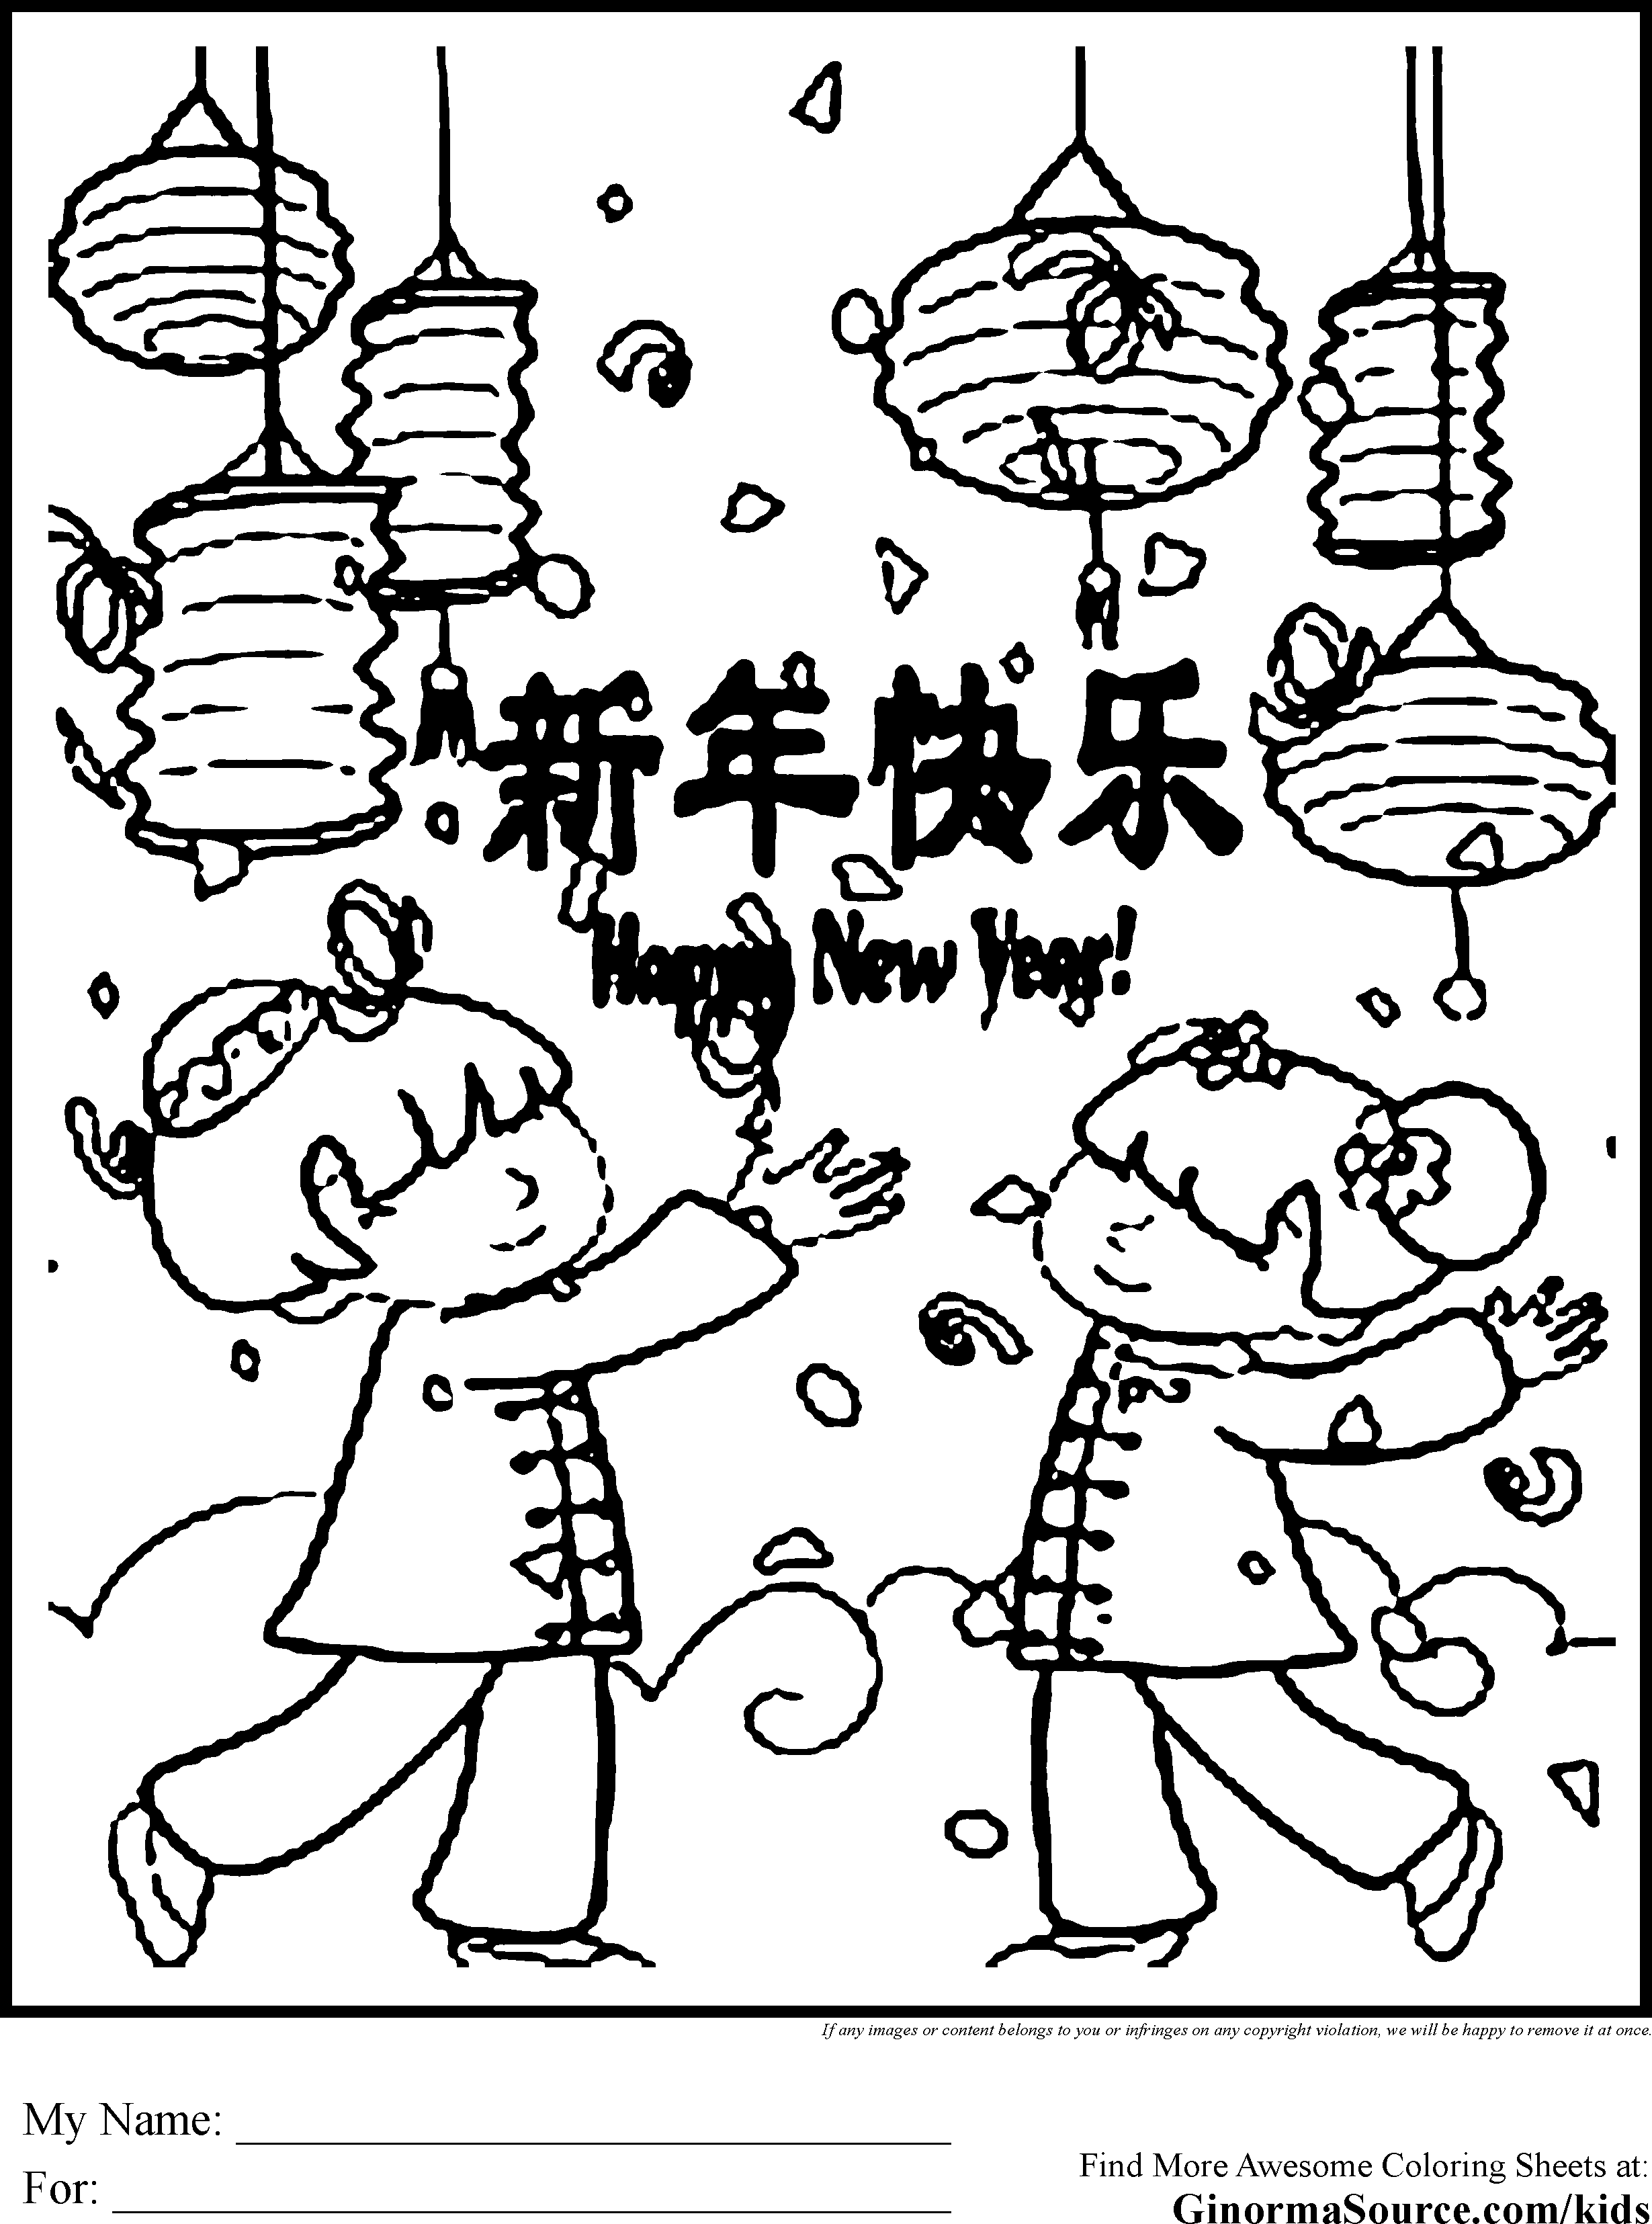 Chinese new year coloring pages to download and print for free2459 x 3310